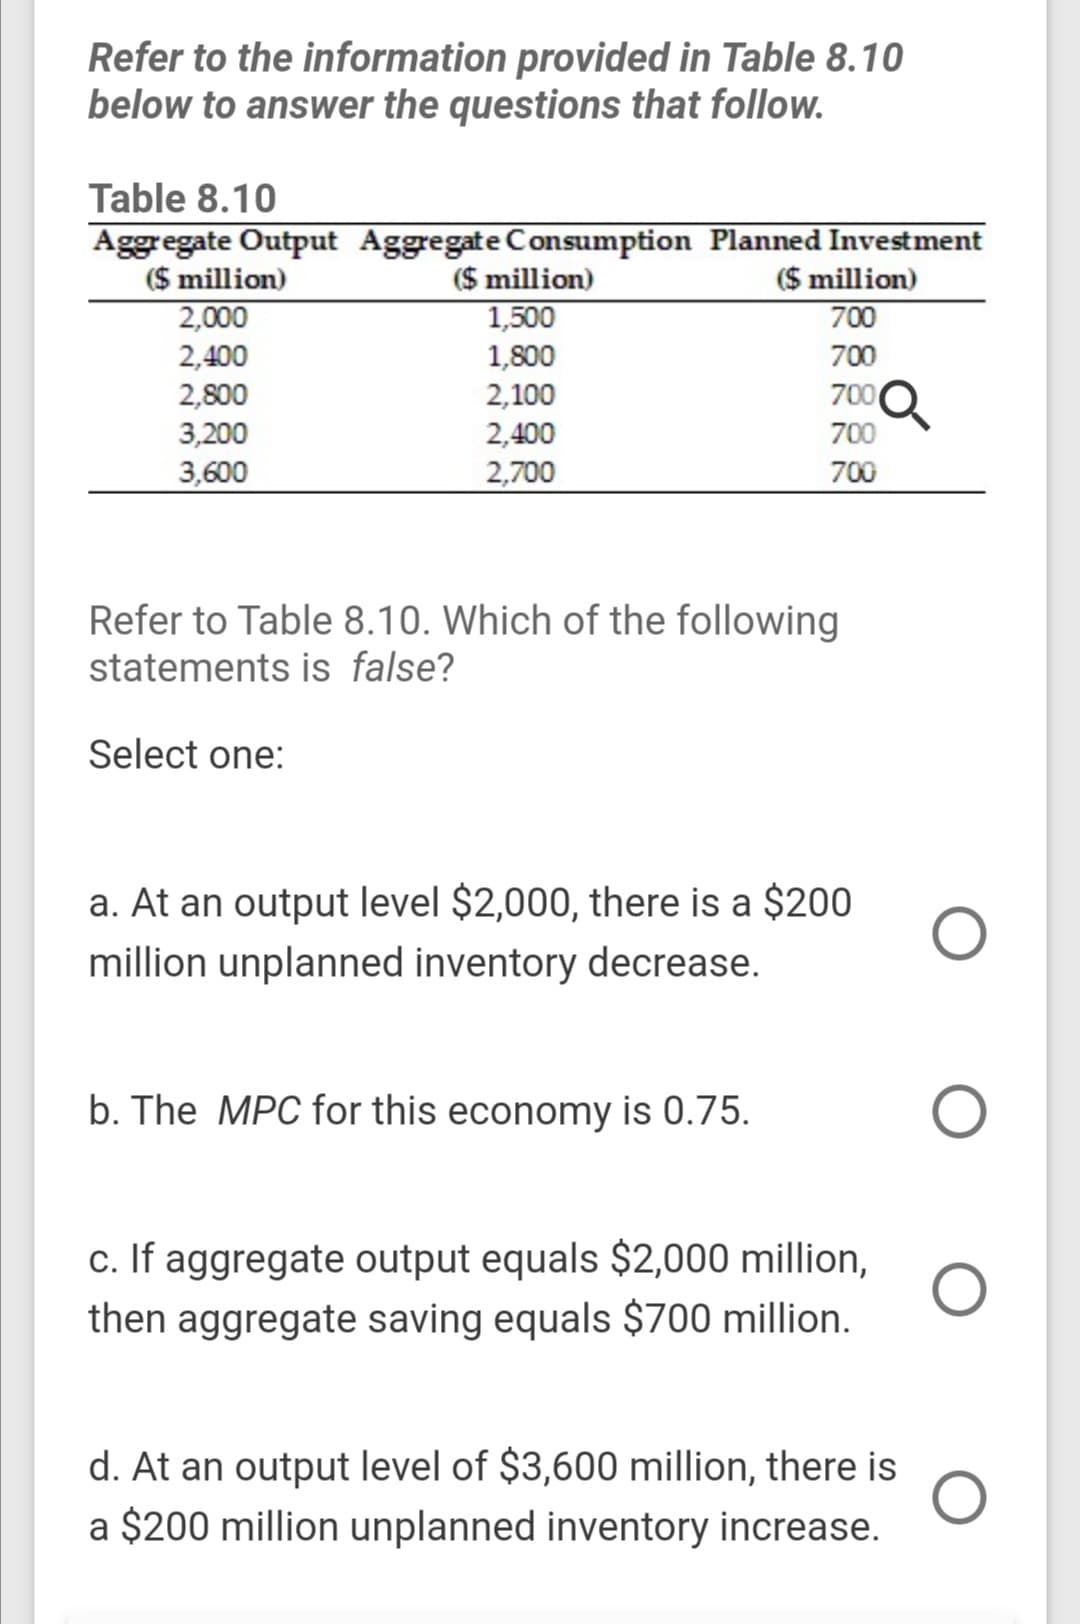 Refer to the information provided in Table 8.10
below to answer the questions that follow.
Table 8.10
Aggregate Output Aggregate Consumption Planned Investment
($ million)
1,500
1,800
2,100
2,400
($ million)
700
($ million)
2,000
2,400
2,800
3,200
700
700Q
700
3,600
2,700
700
Refer to Table 8.10. Which of the following
statements is false?
Select one:
a. At an output level $2,000, there is a $200
million unplanned inventory decrease.
b. The MPC for this economy is 0.75.
c. If aggregate output equals $2,000 million,
then aggregate saving equals $700 million.
d. At an output level of $3,600 million, there is
a $200 million unplanned inventory increase.
